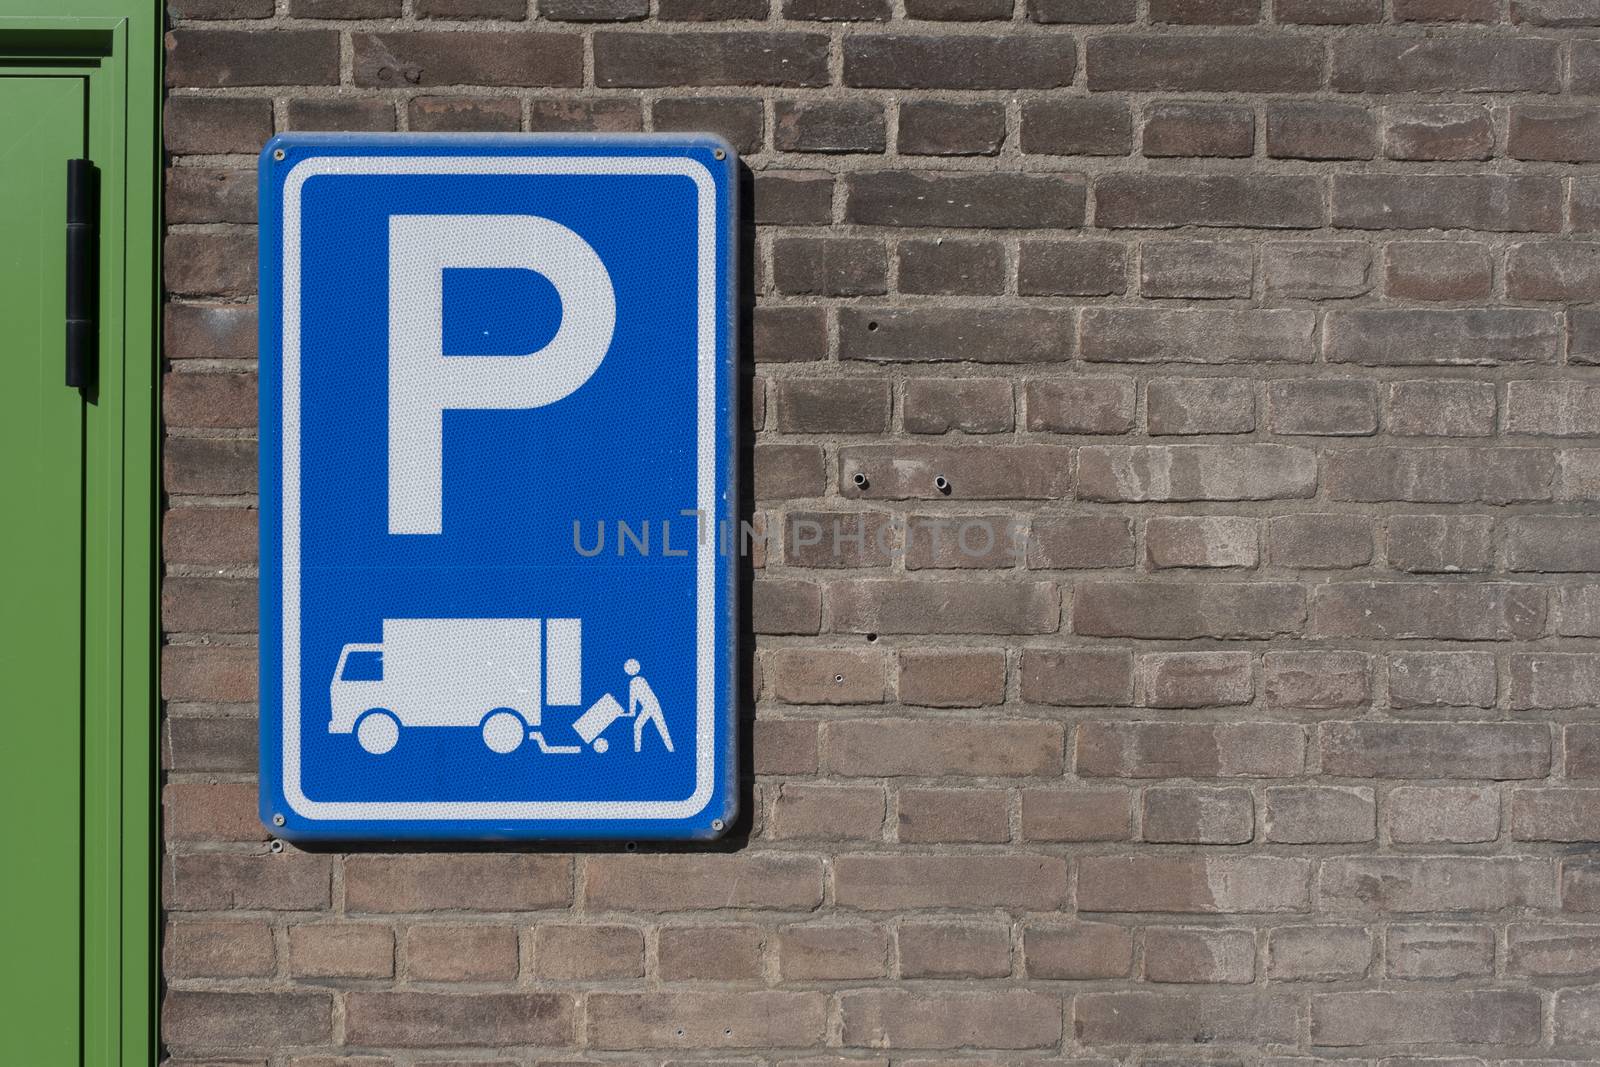 Dutch road sign: parking permitted for the immediate loading and unloading of goods only